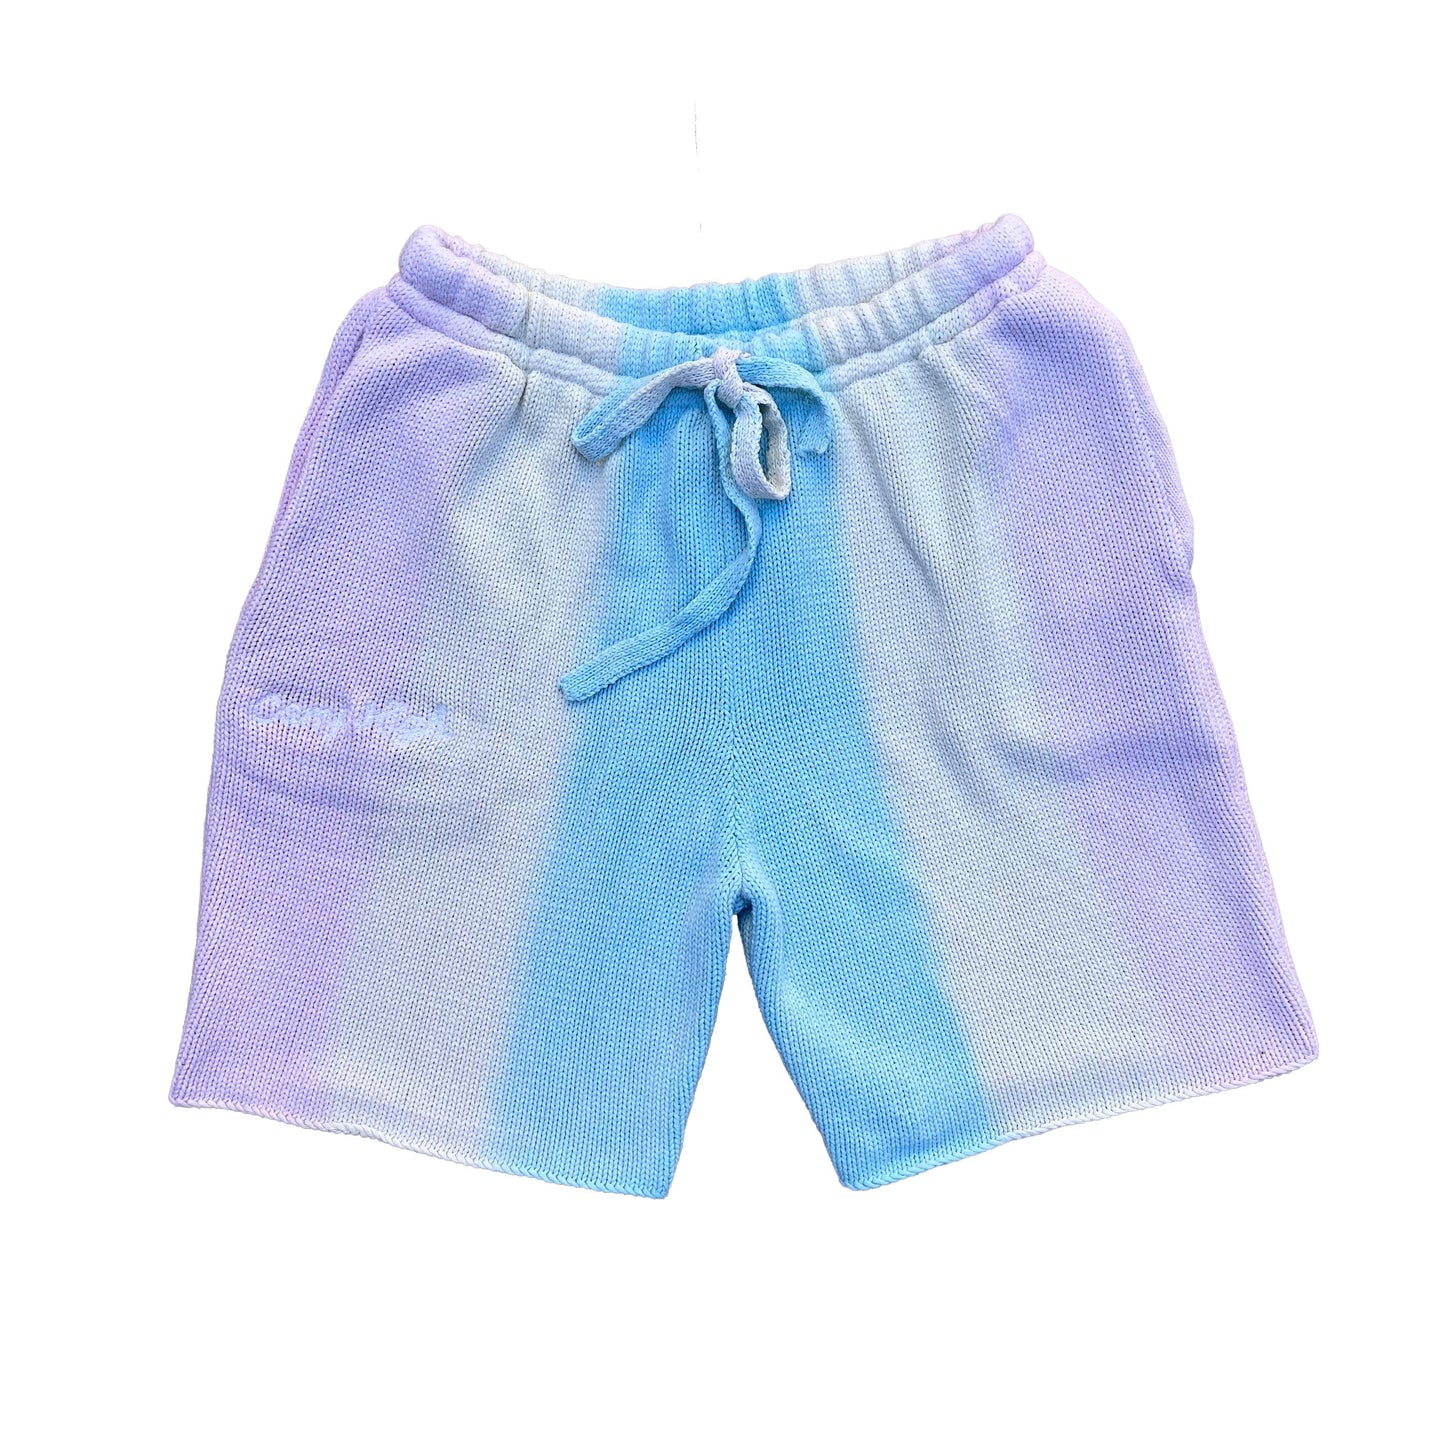 Camp High S/M AURA OMBRE KNIT SHORTS